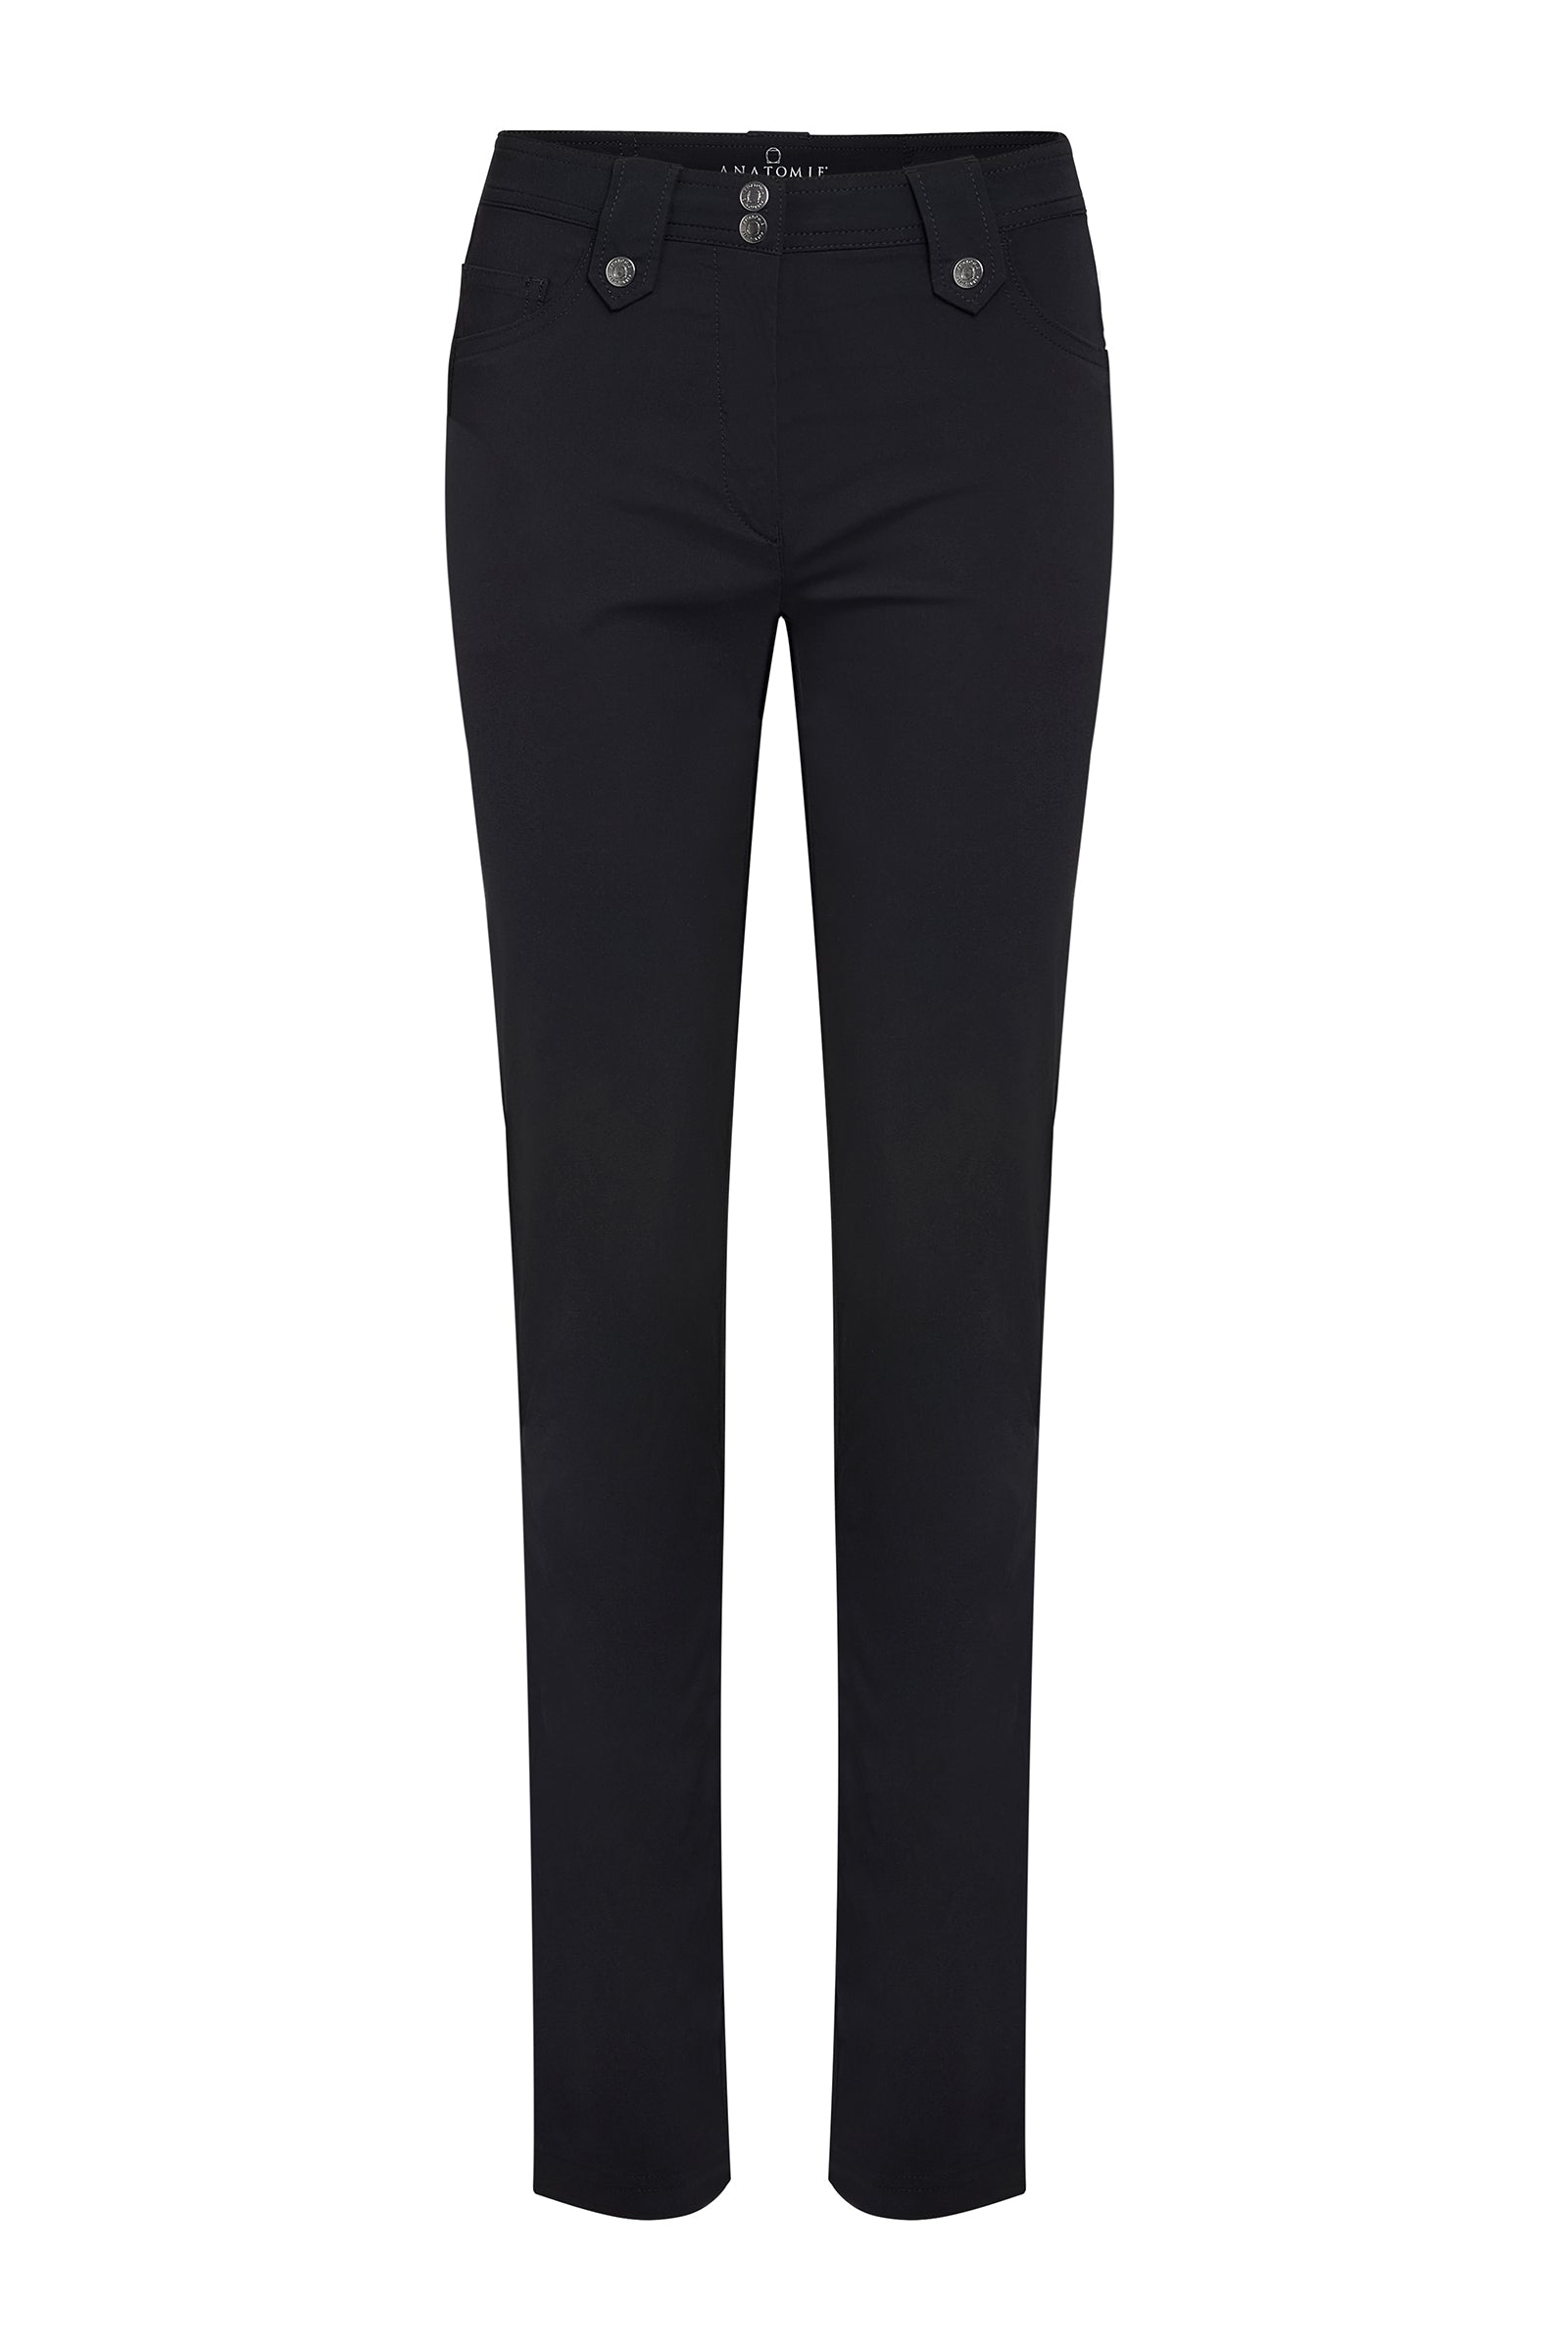 SASSAFRAS Grey Women Straight Fit Travel Features Cargos Trousers - Price  History